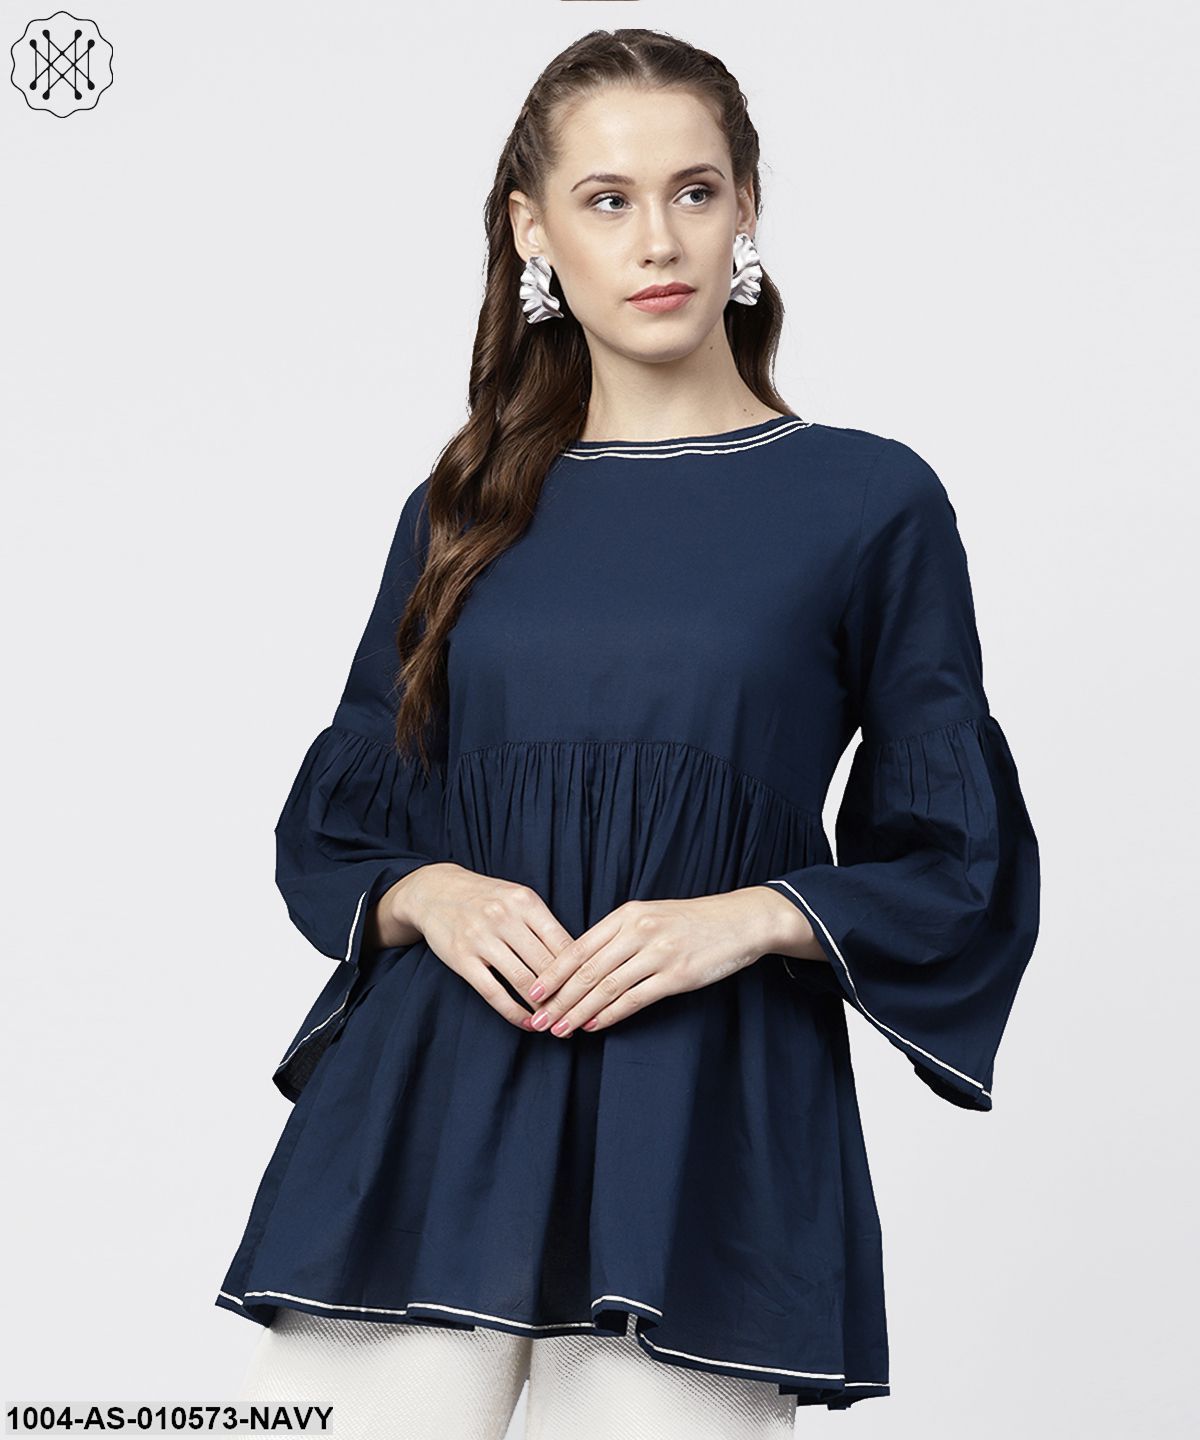 Women Navy Blue Solid Round Neck Long Sleeves Cotton Tunic